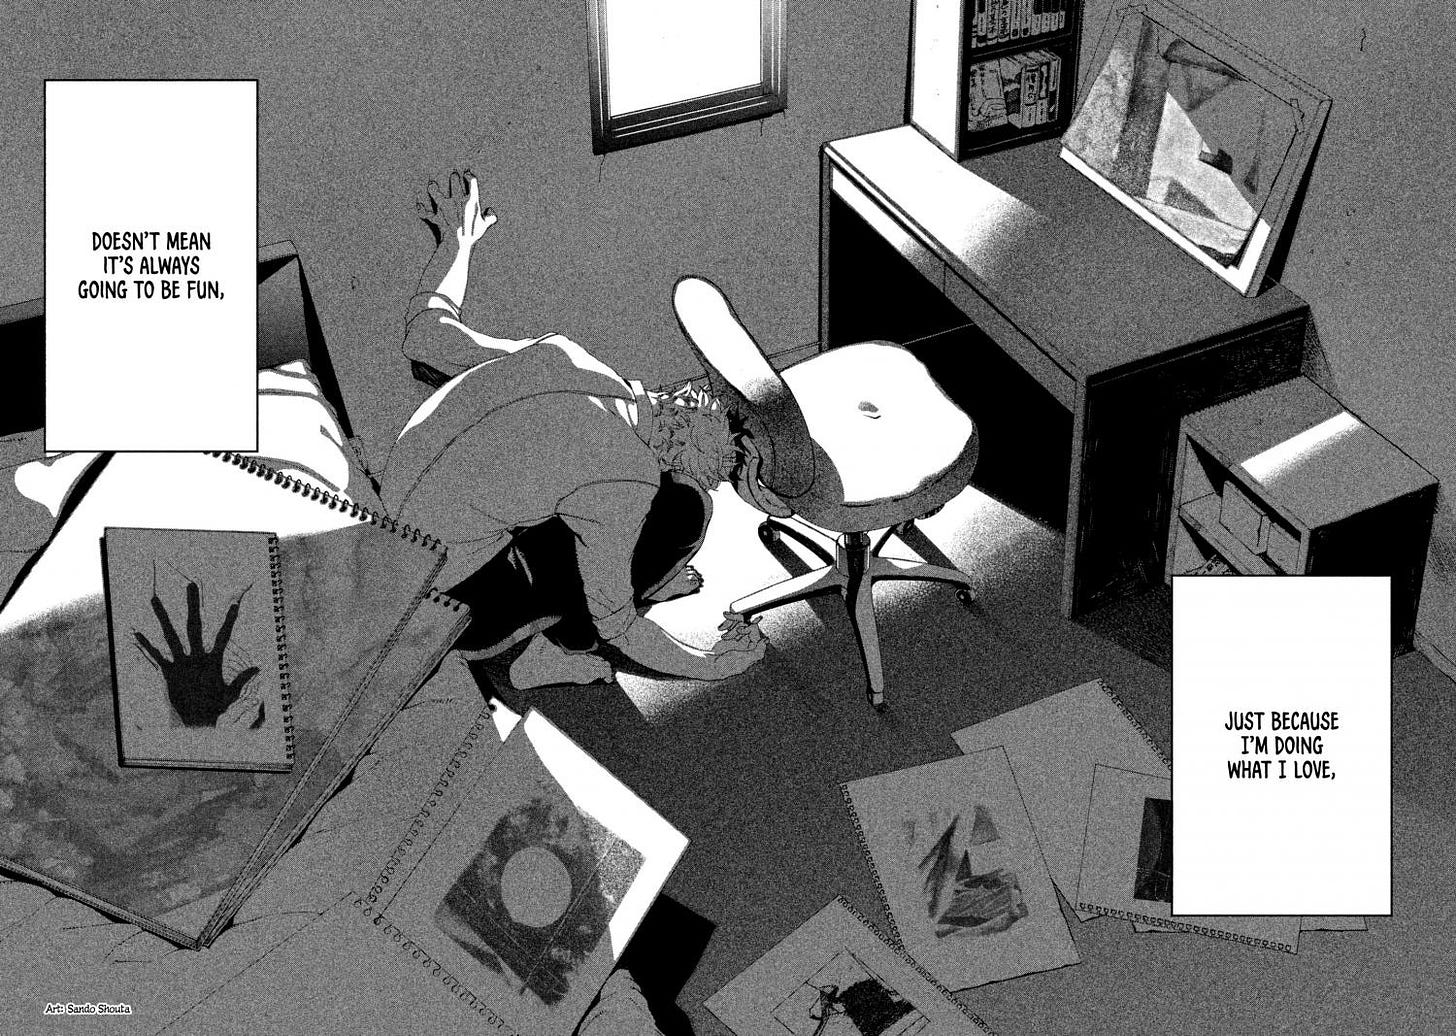 the main character of blue period, yatora yaguchi, hunched over in his room with his paintings strewn about. the text boxes say, just because i'm doing what i love, doesn't mean it's always going to be fun.